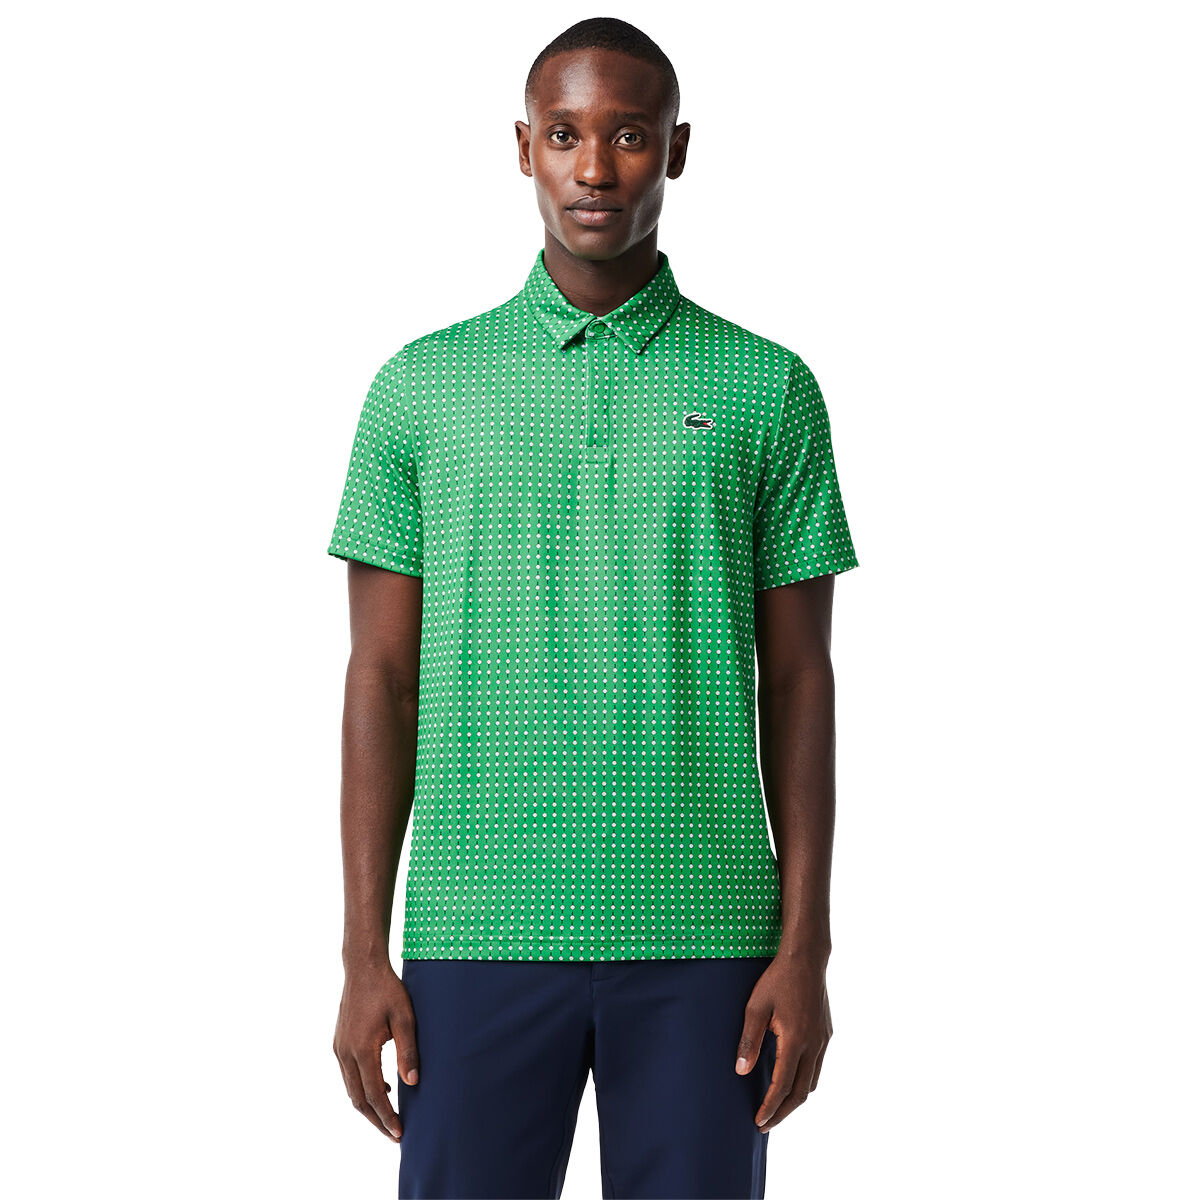 Lacoste Men’s All-Over Print Golf Polo Shirt, Mens, Green, Large | American Golf